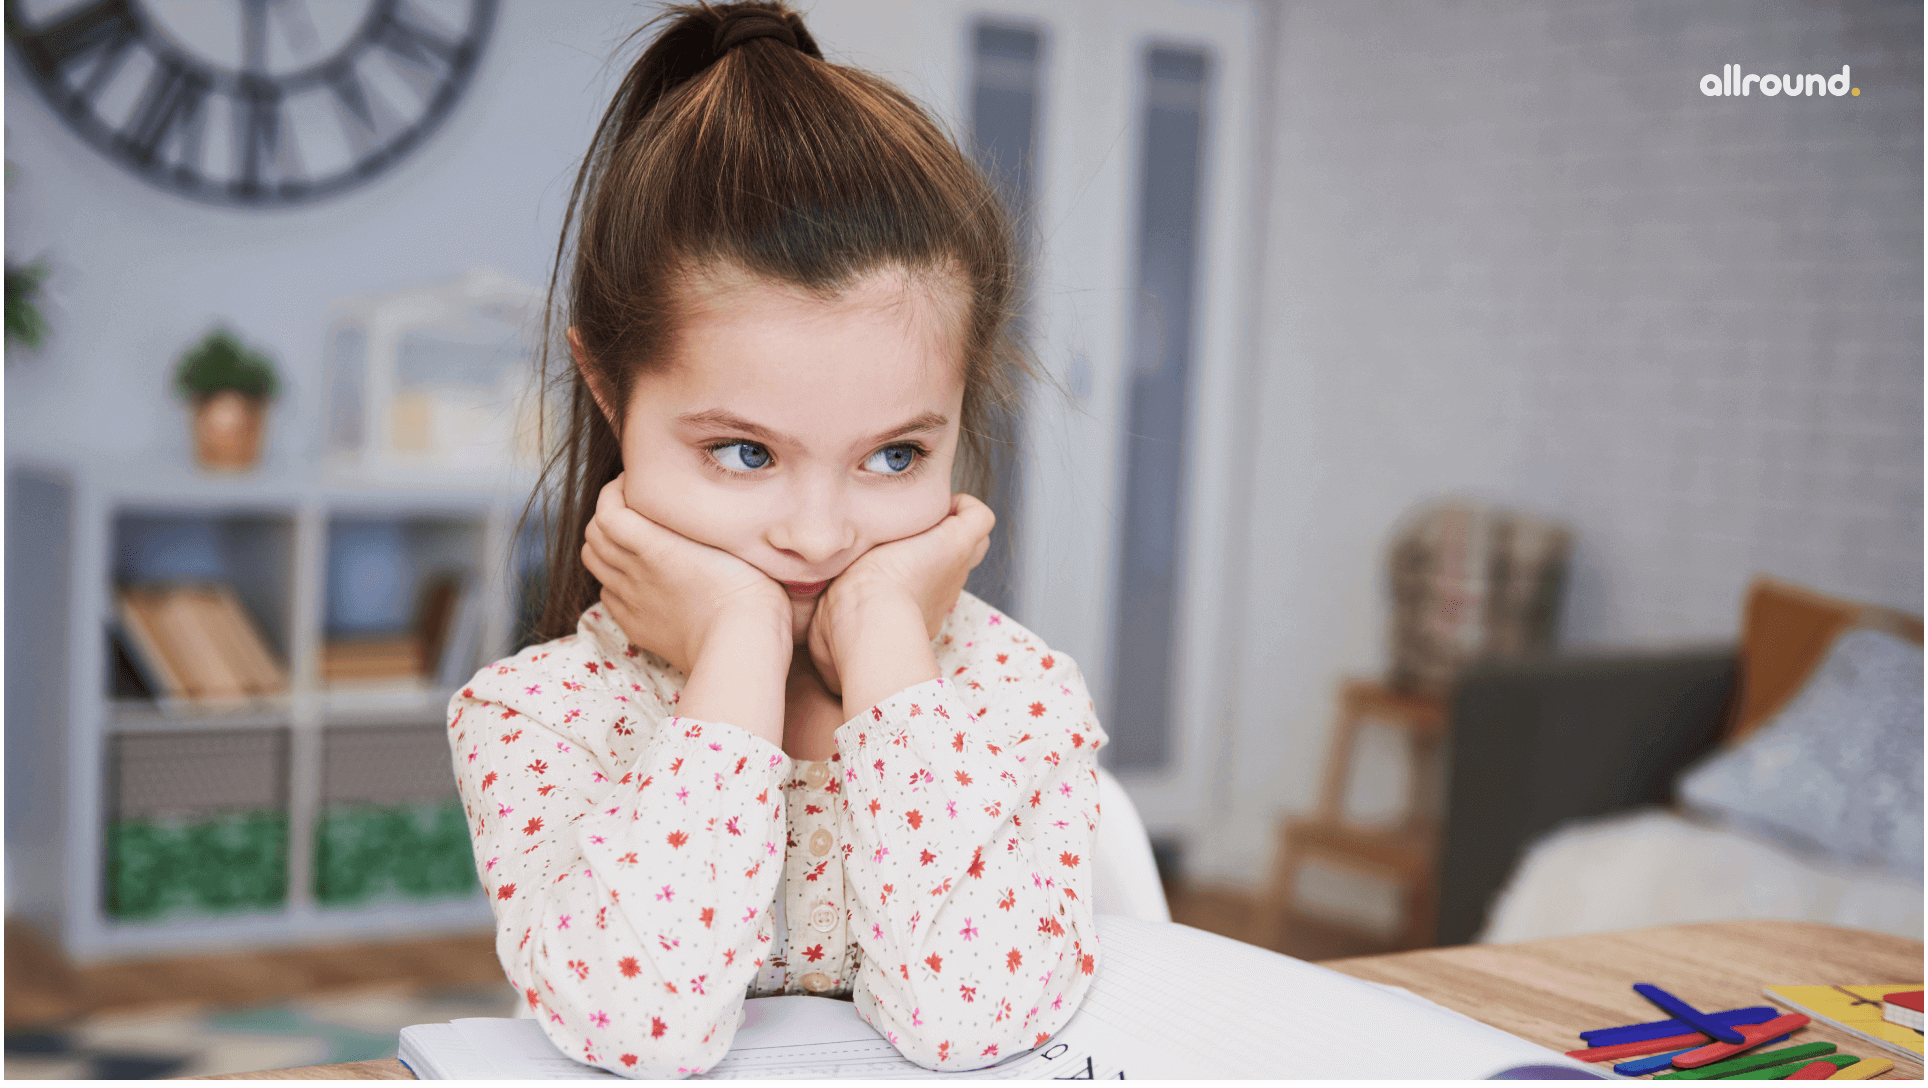 Homeschooling Fears: 4 Ways to Overcome Them Successfully